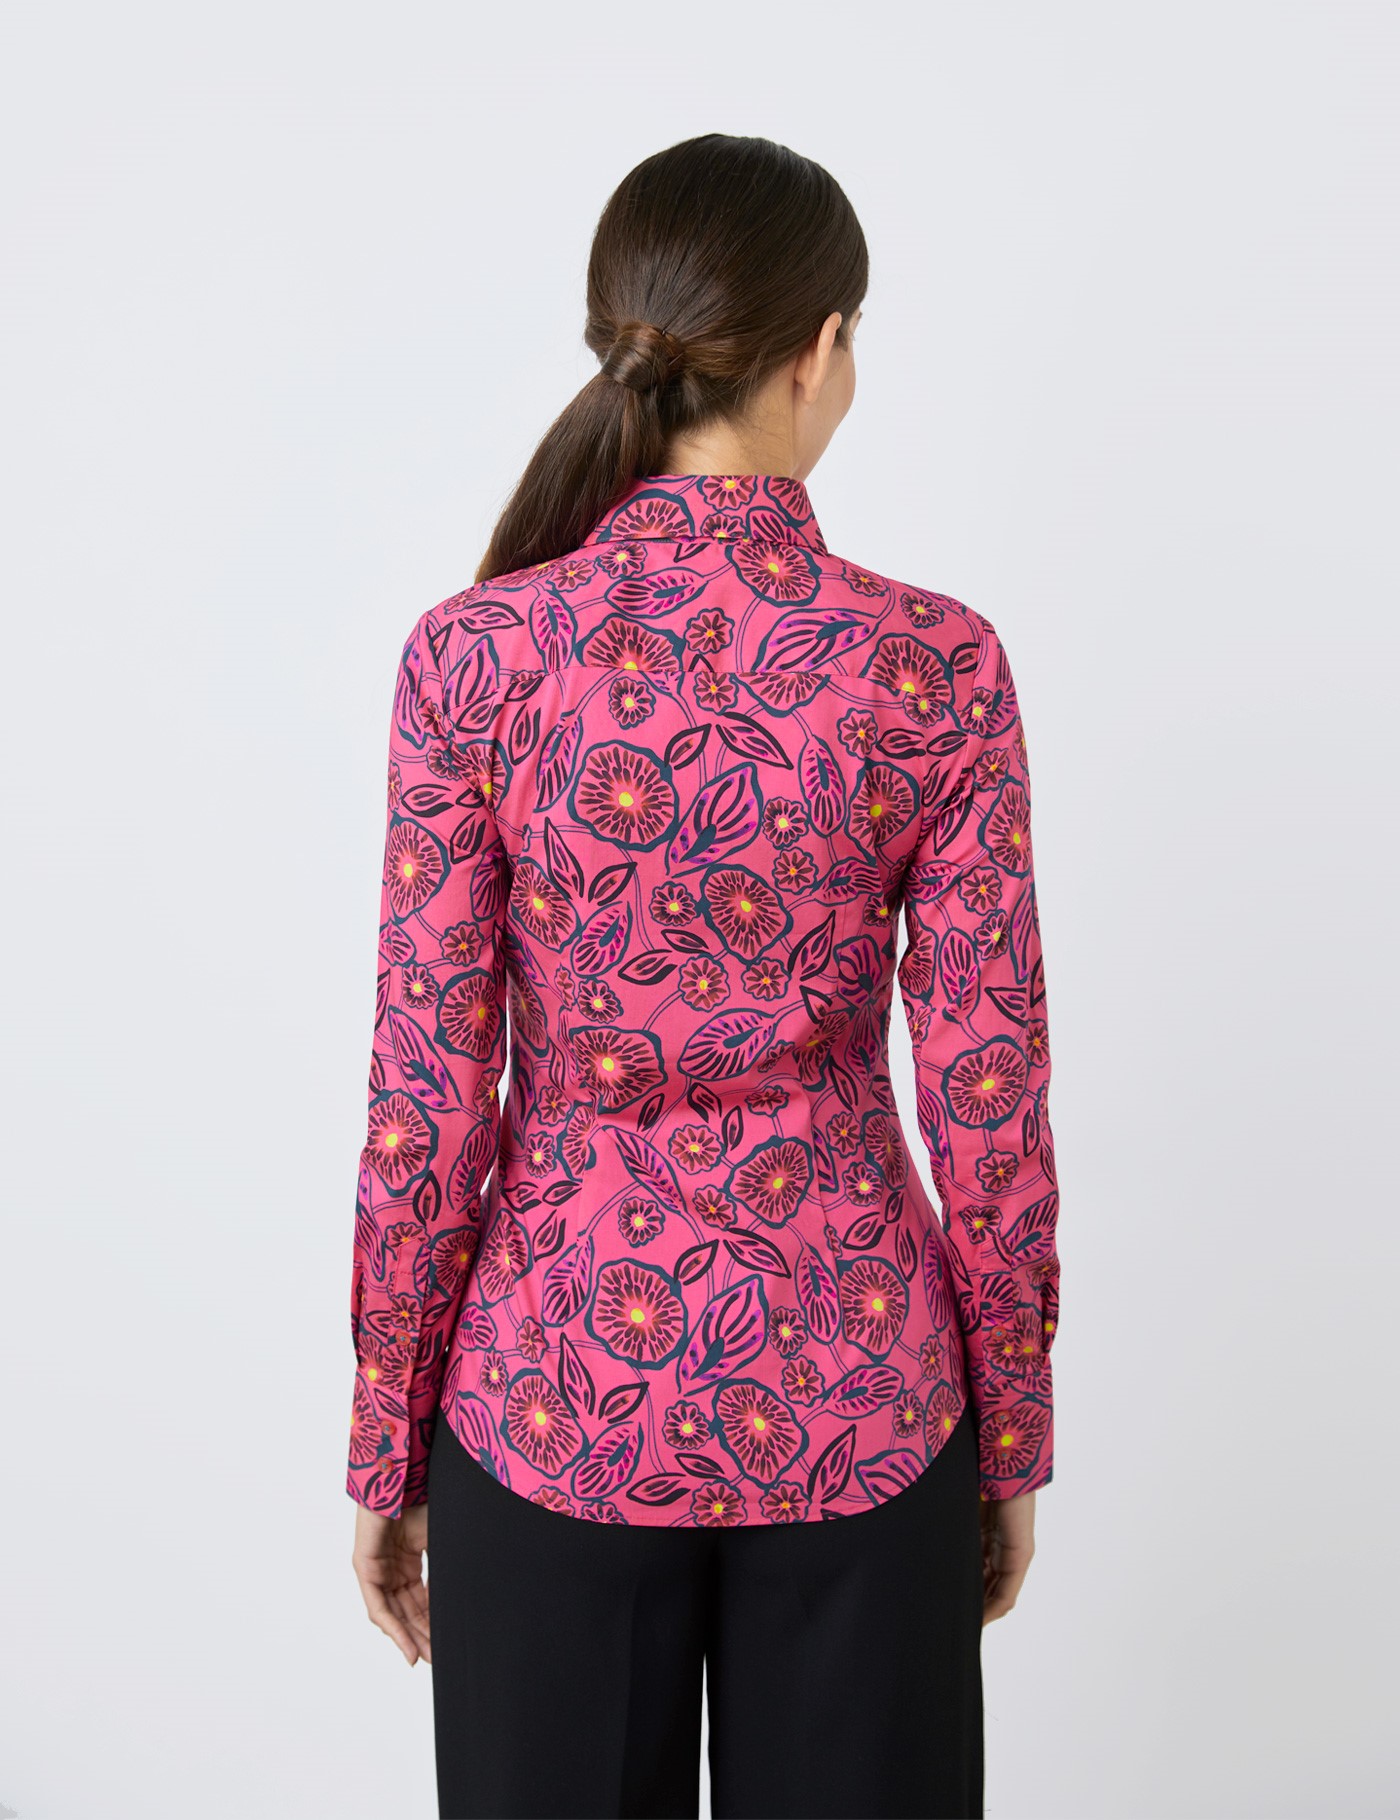 Cotton Stretch Women's Fitted Shirt with Floral Print and Single Cuff ...